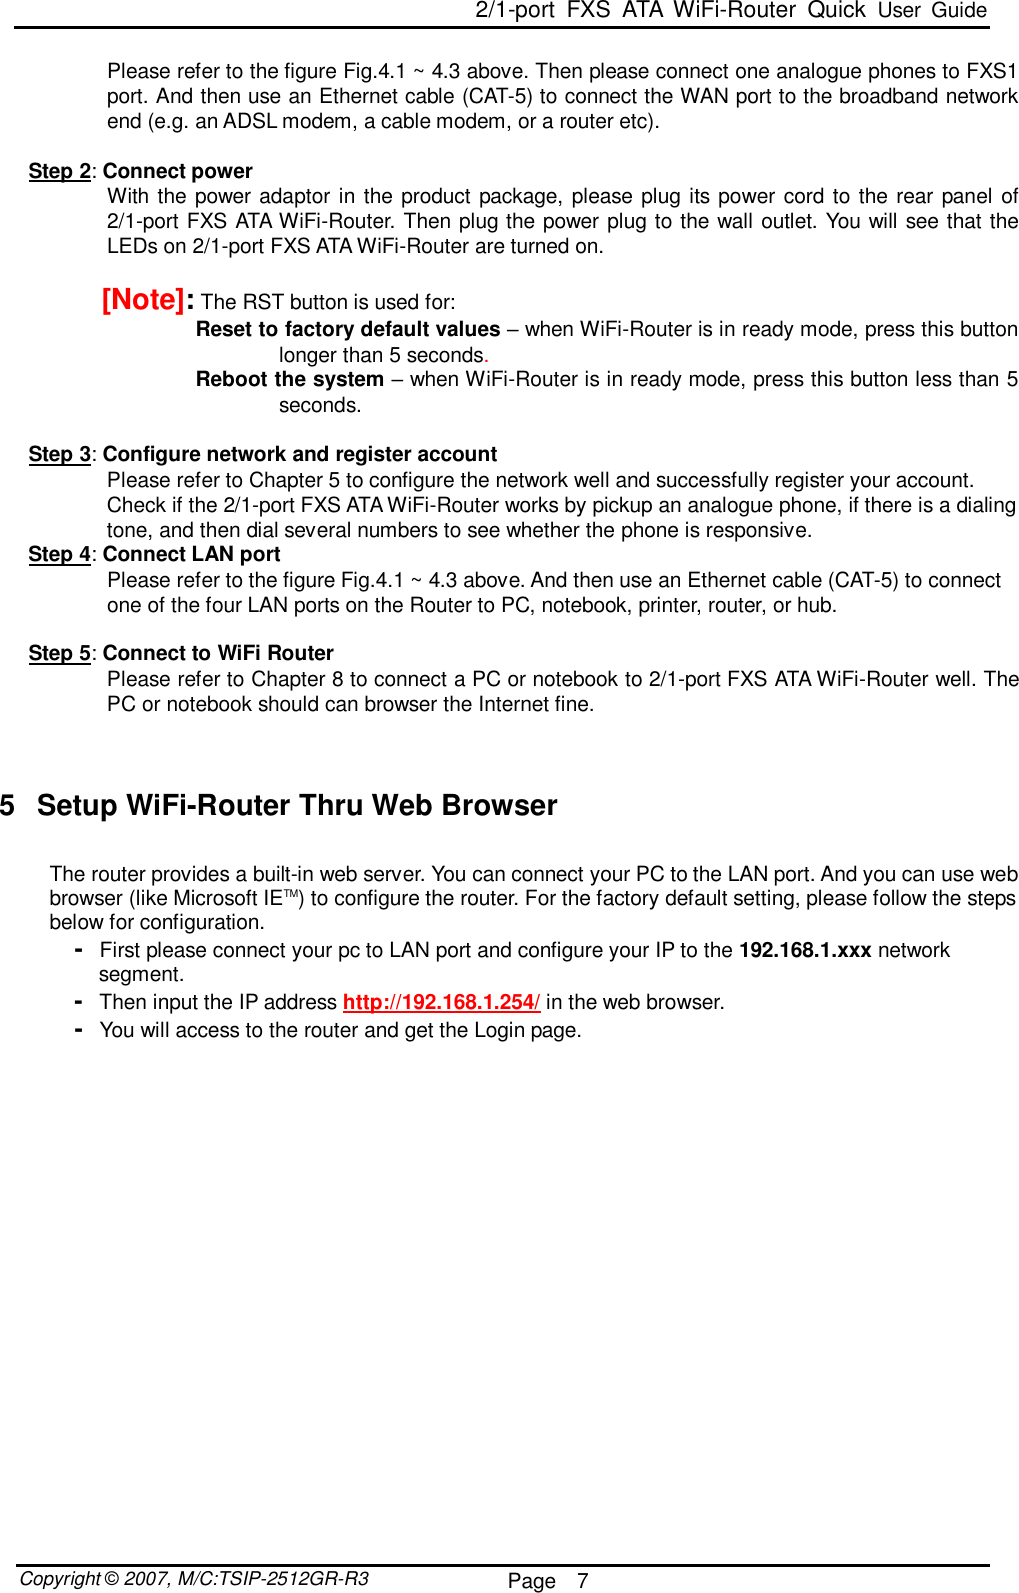  2/1-port FXS ATA WiFi-Router Quick User Guide  Copyright © 2007, M/C:TSIP-2512GR-R3  Page  7     Please refer to the figure Fig.4.1 ~ 4.3 above. Then please connect one analogue phones to FXS1 port. And then use an Ethernet cable (CAT-5) to connect the WAN port to the broadband network end (e.g. an ADSL modem, a cable modem, or a router etc).  Step 2: Connect power With the power adaptor in the product package, please plug its power cord to the rear panel of 2/1-port FXS ATA WiFi-Router. Then plug the power plug to the wall outlet. You will see that the LEDs on 2/1-port FXS ATA WiFi-Router are turned on.   [Note]: The RST button is used for: Reset to factory default values – when WiFi-Router is in ready mode, press this button longer than 5 seconds. Reboot the system – when WiFi-Router is in ready mode, press this button less than 5 seconds.  Step 3: Configure network and register account Please refer to Chapter 5 to configure the network well and successfully register your account. Check if the 2/1-port FXS ATA WiFi-Router works by pickup an analogue phone, if there is a dialing tone, and then dial several numbers to see whether the phone is responsive.  Step 4: Connect LAN port Please refer to the figure Fig.4.1 ~ 4.3 above. And then use an Ethernet cable (CAT-5) to connect one of the four LAN ports on the Router to PC, notebook, printer, router, or hub.   Step 5: Connect to WiFi Router Please refer to Chapter 8 to connect a PC or notebook to 2/1-port FXS ATA WiFi-Router well. The PC or notebook should can browser the Internet fine.      5 Setup WiFi-Router Thru Web Browser  The router provides a built-in web server. You can connect your PC to the LAN port. And you can use web browser (like Microsoft IETM) to configure the router. For the factory default setting, please follow the steps below for configuration.  -  First please connect your pc to LAN port and configure your IP to the 192.168.1.xxx network segment. -  Then input the IP address http://192.168.1.254/ in the web browser. -  You will access to the router and get the Login page.   